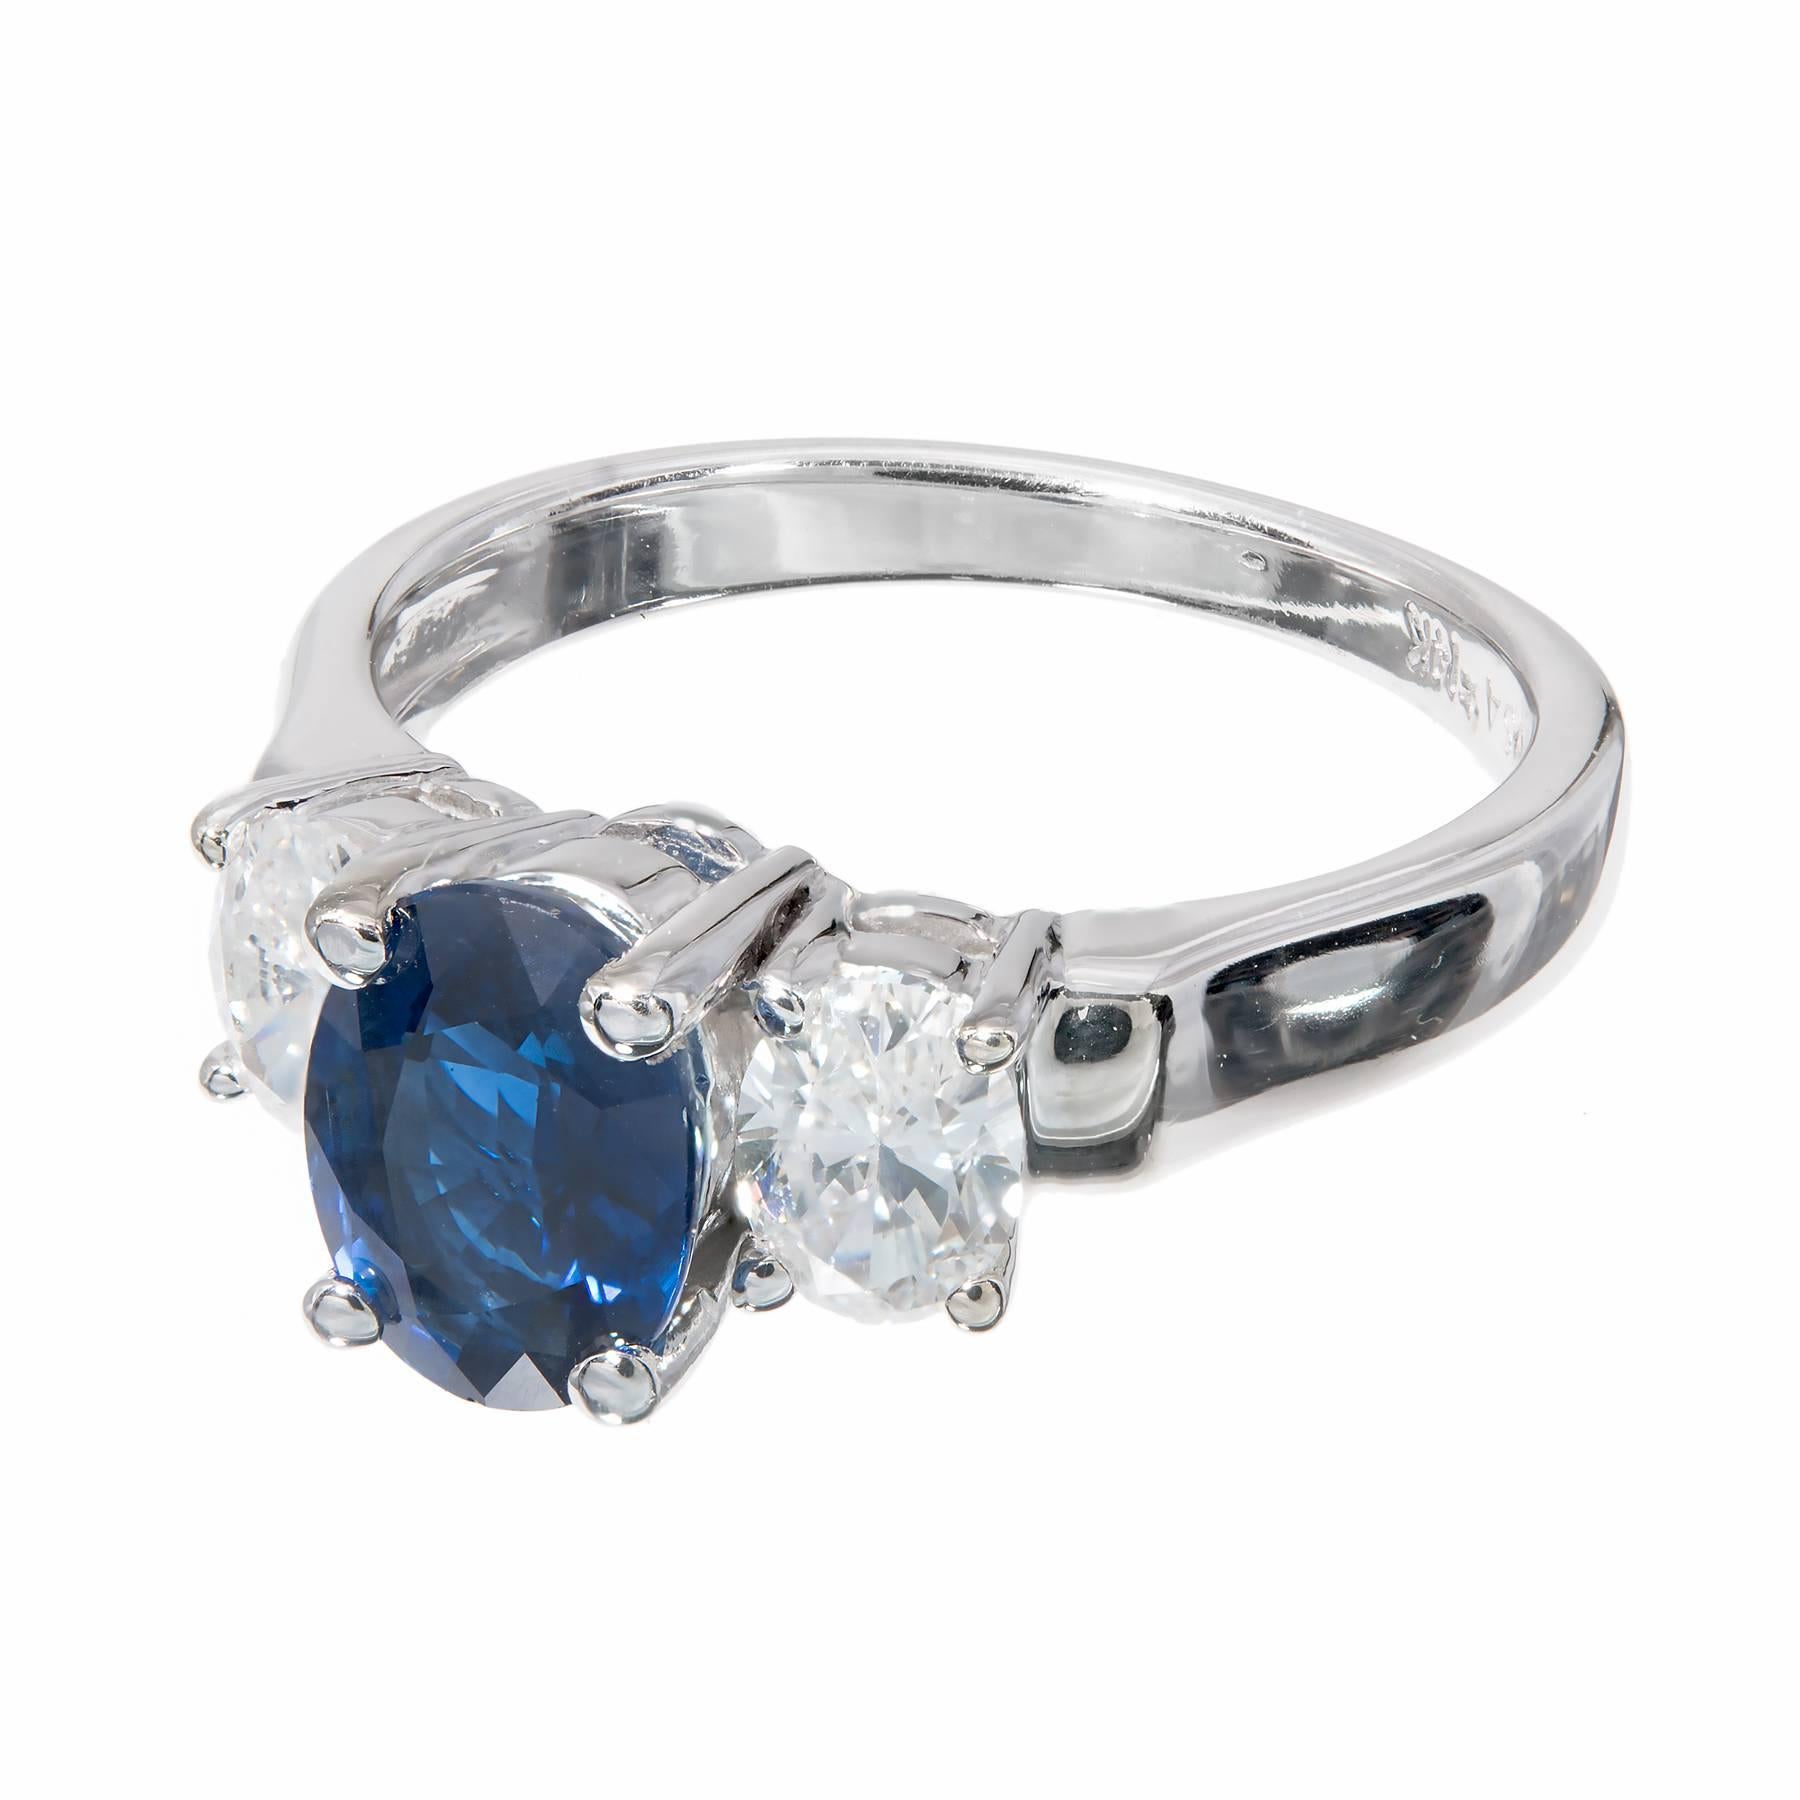 White gold bright Royal blue Sapphire engagement ring. The center Sapphire is GIA certified simple heat only. Matched with bright white diamonds.

1 oval Royal blue Sapphire, approx. total weight 1.45cts, simple heat only, GIA certificate